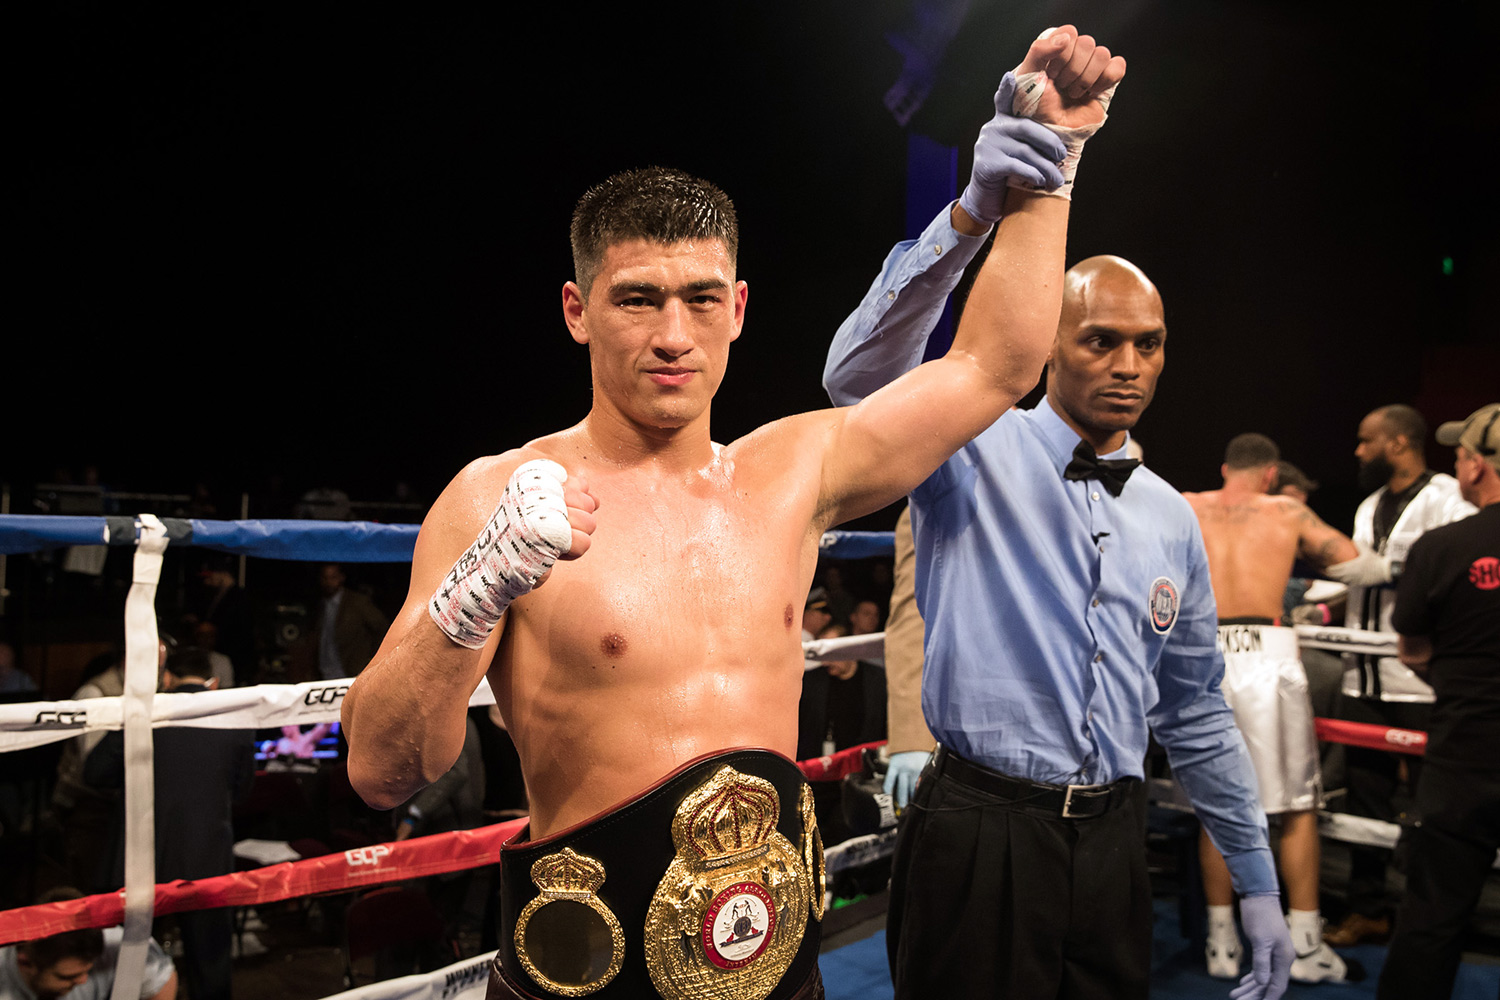 Dmitry Bivol: I have beaten everybody that I have fought, I believe I can beat Canelo